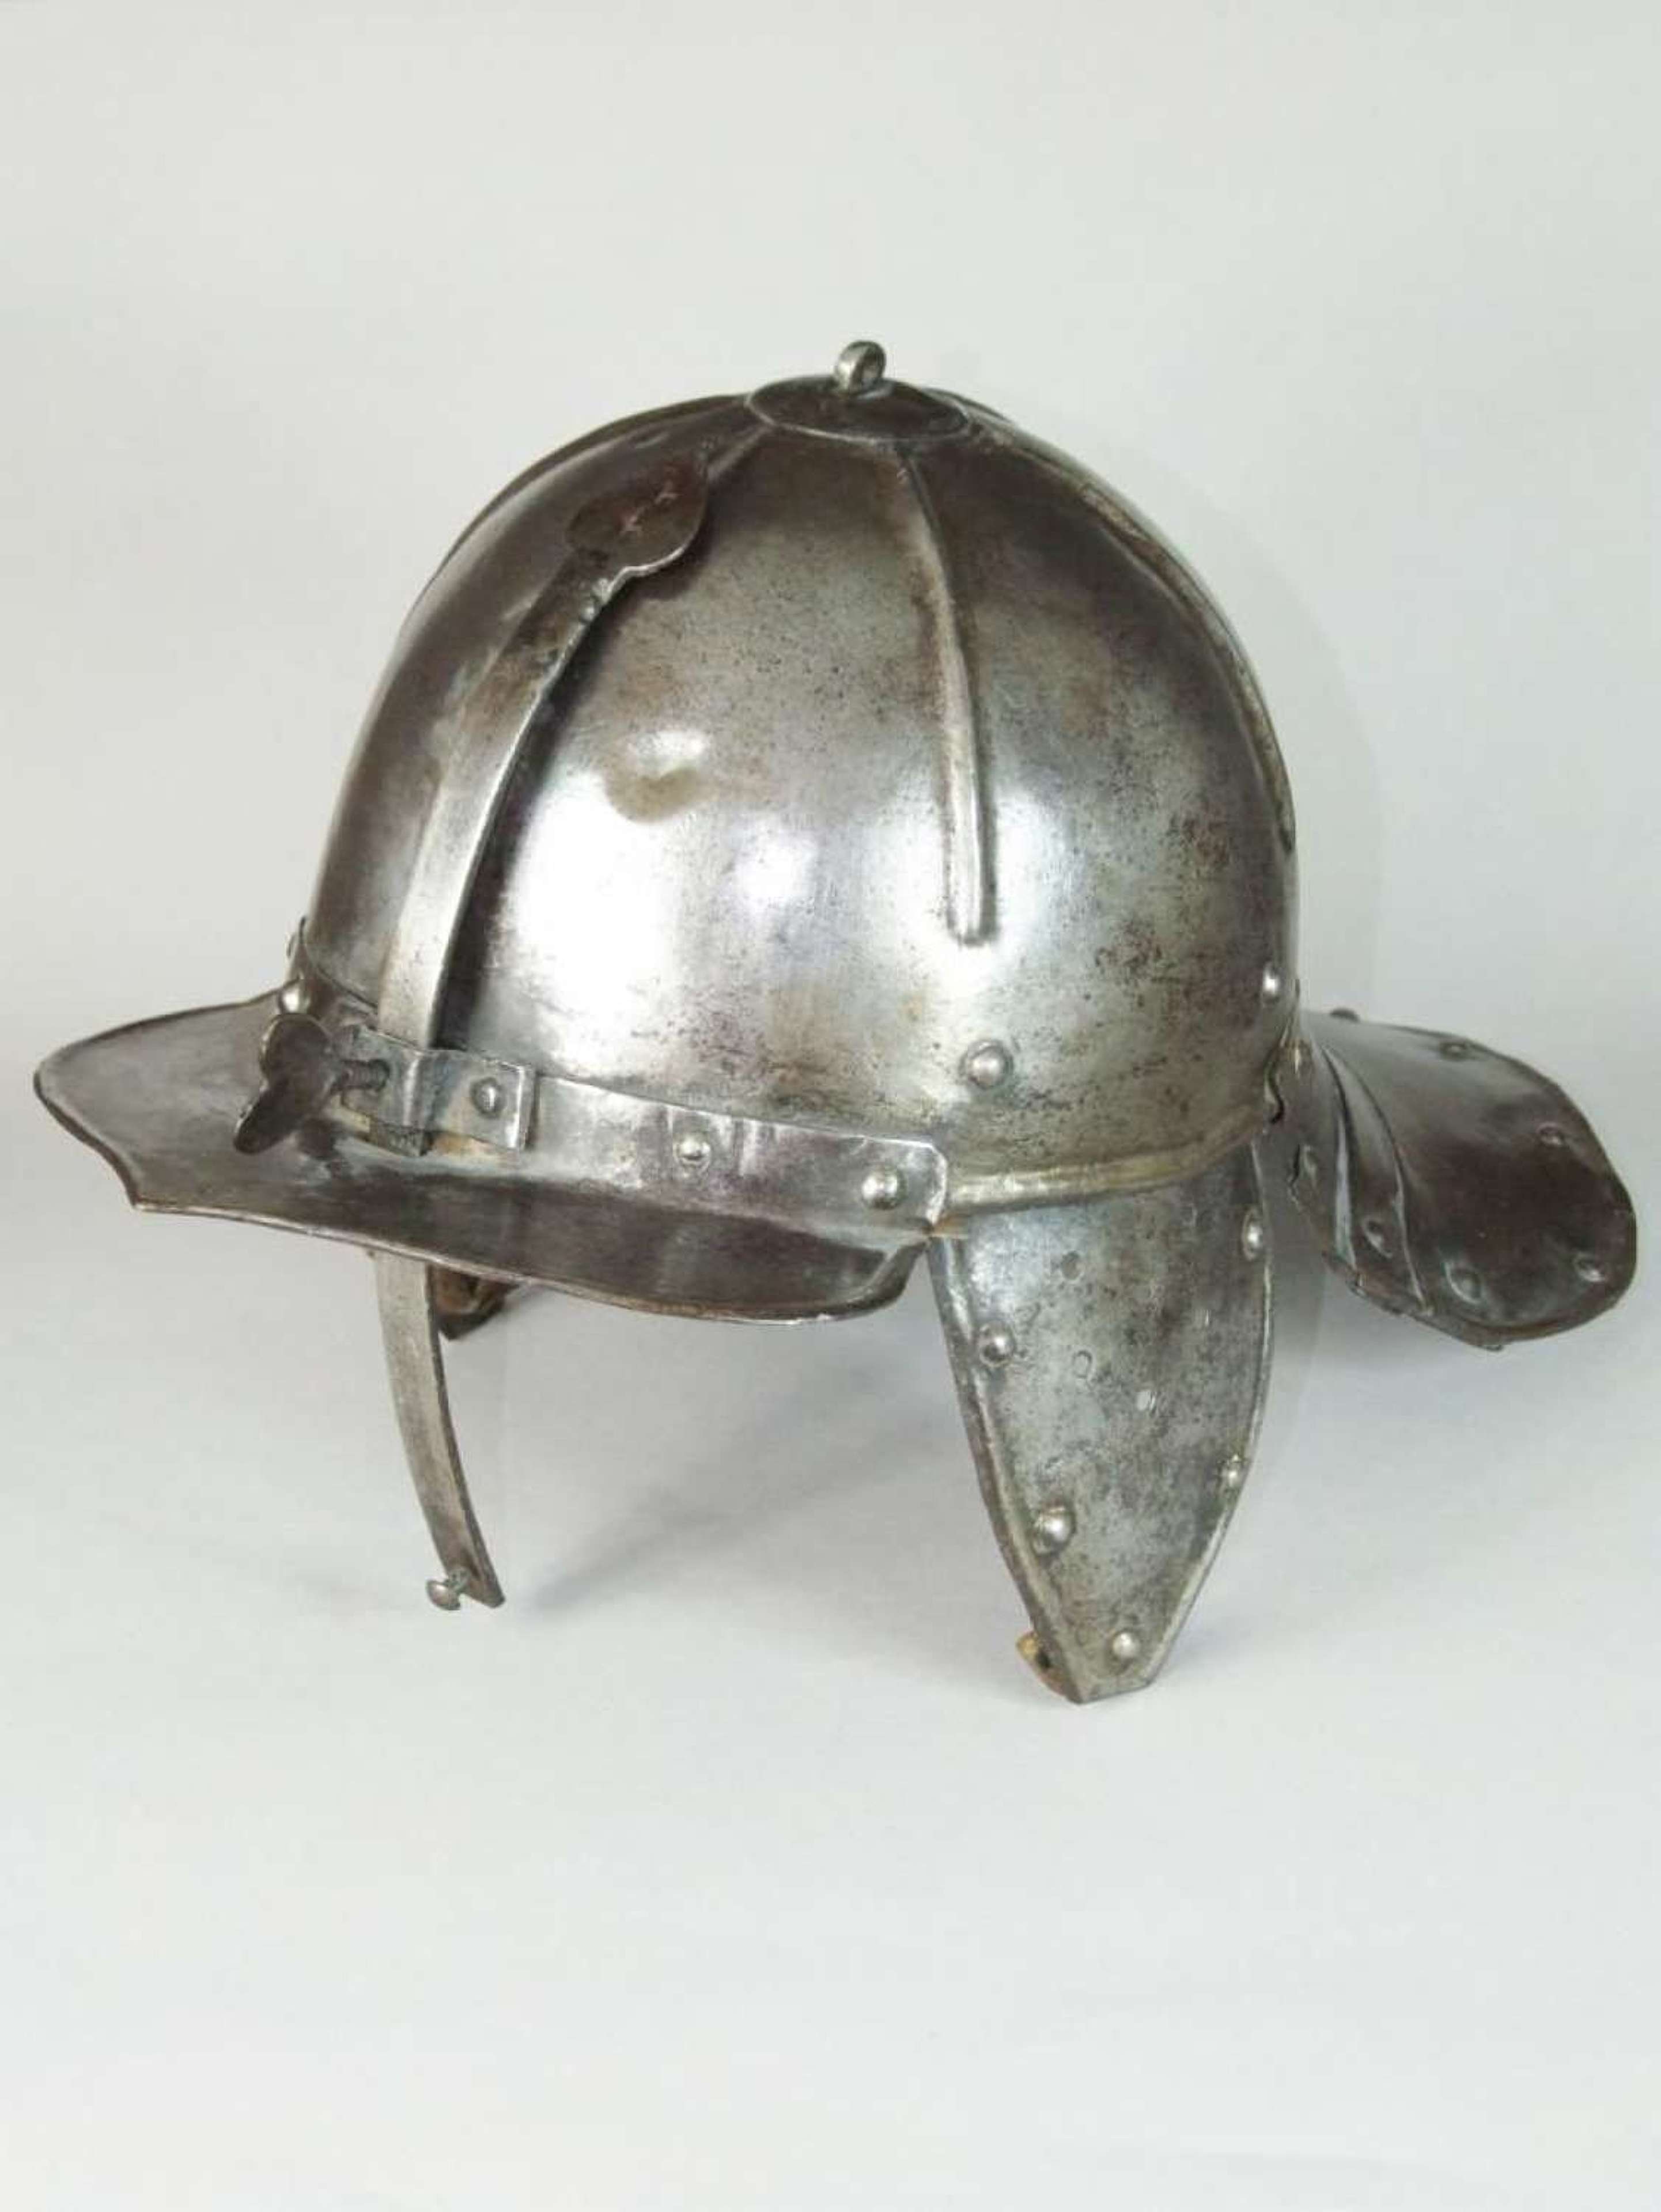 ZischÃ¤gge or Lobster Tail Helmet Dating from about 1650.